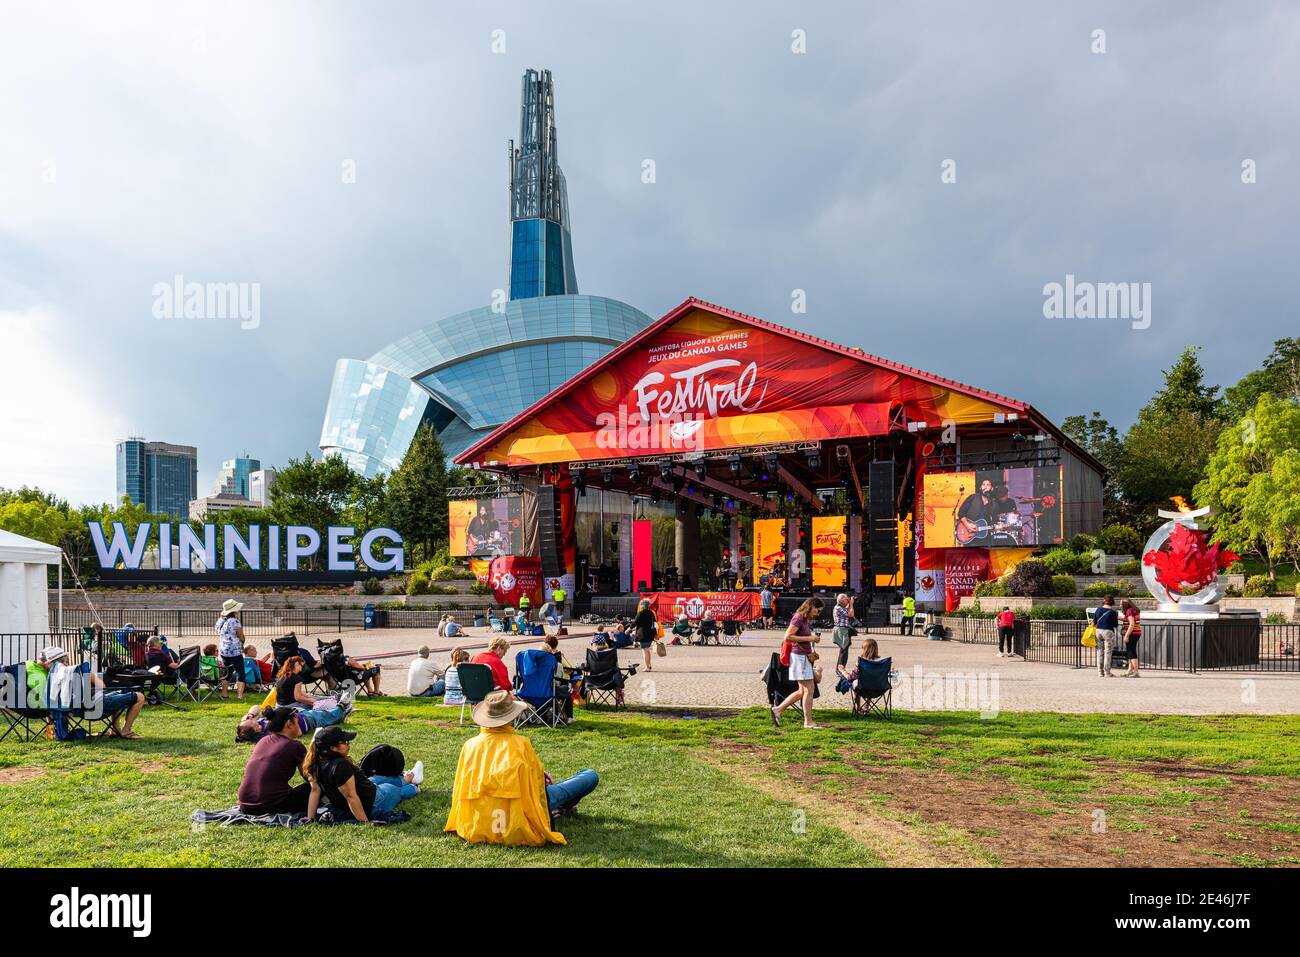 Show for the 2017 Canada games in the city of Winnipeg, Manitoba. Stock Photo